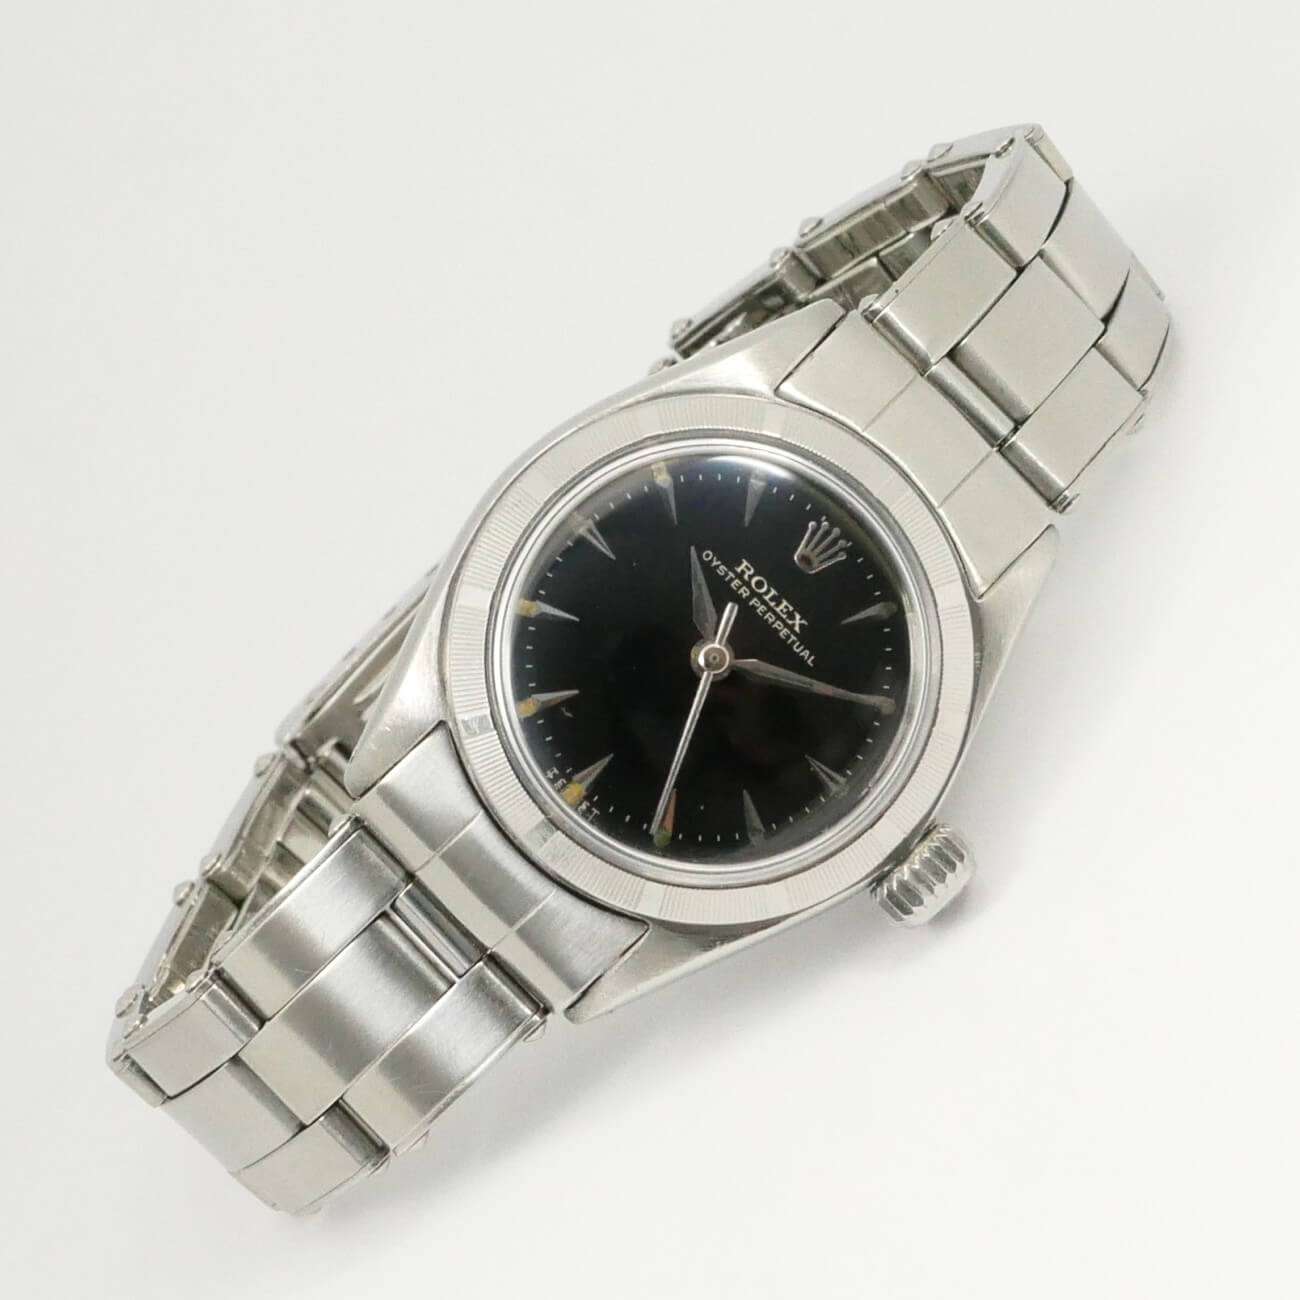 ROLEX OYSTER PERPETUAL 